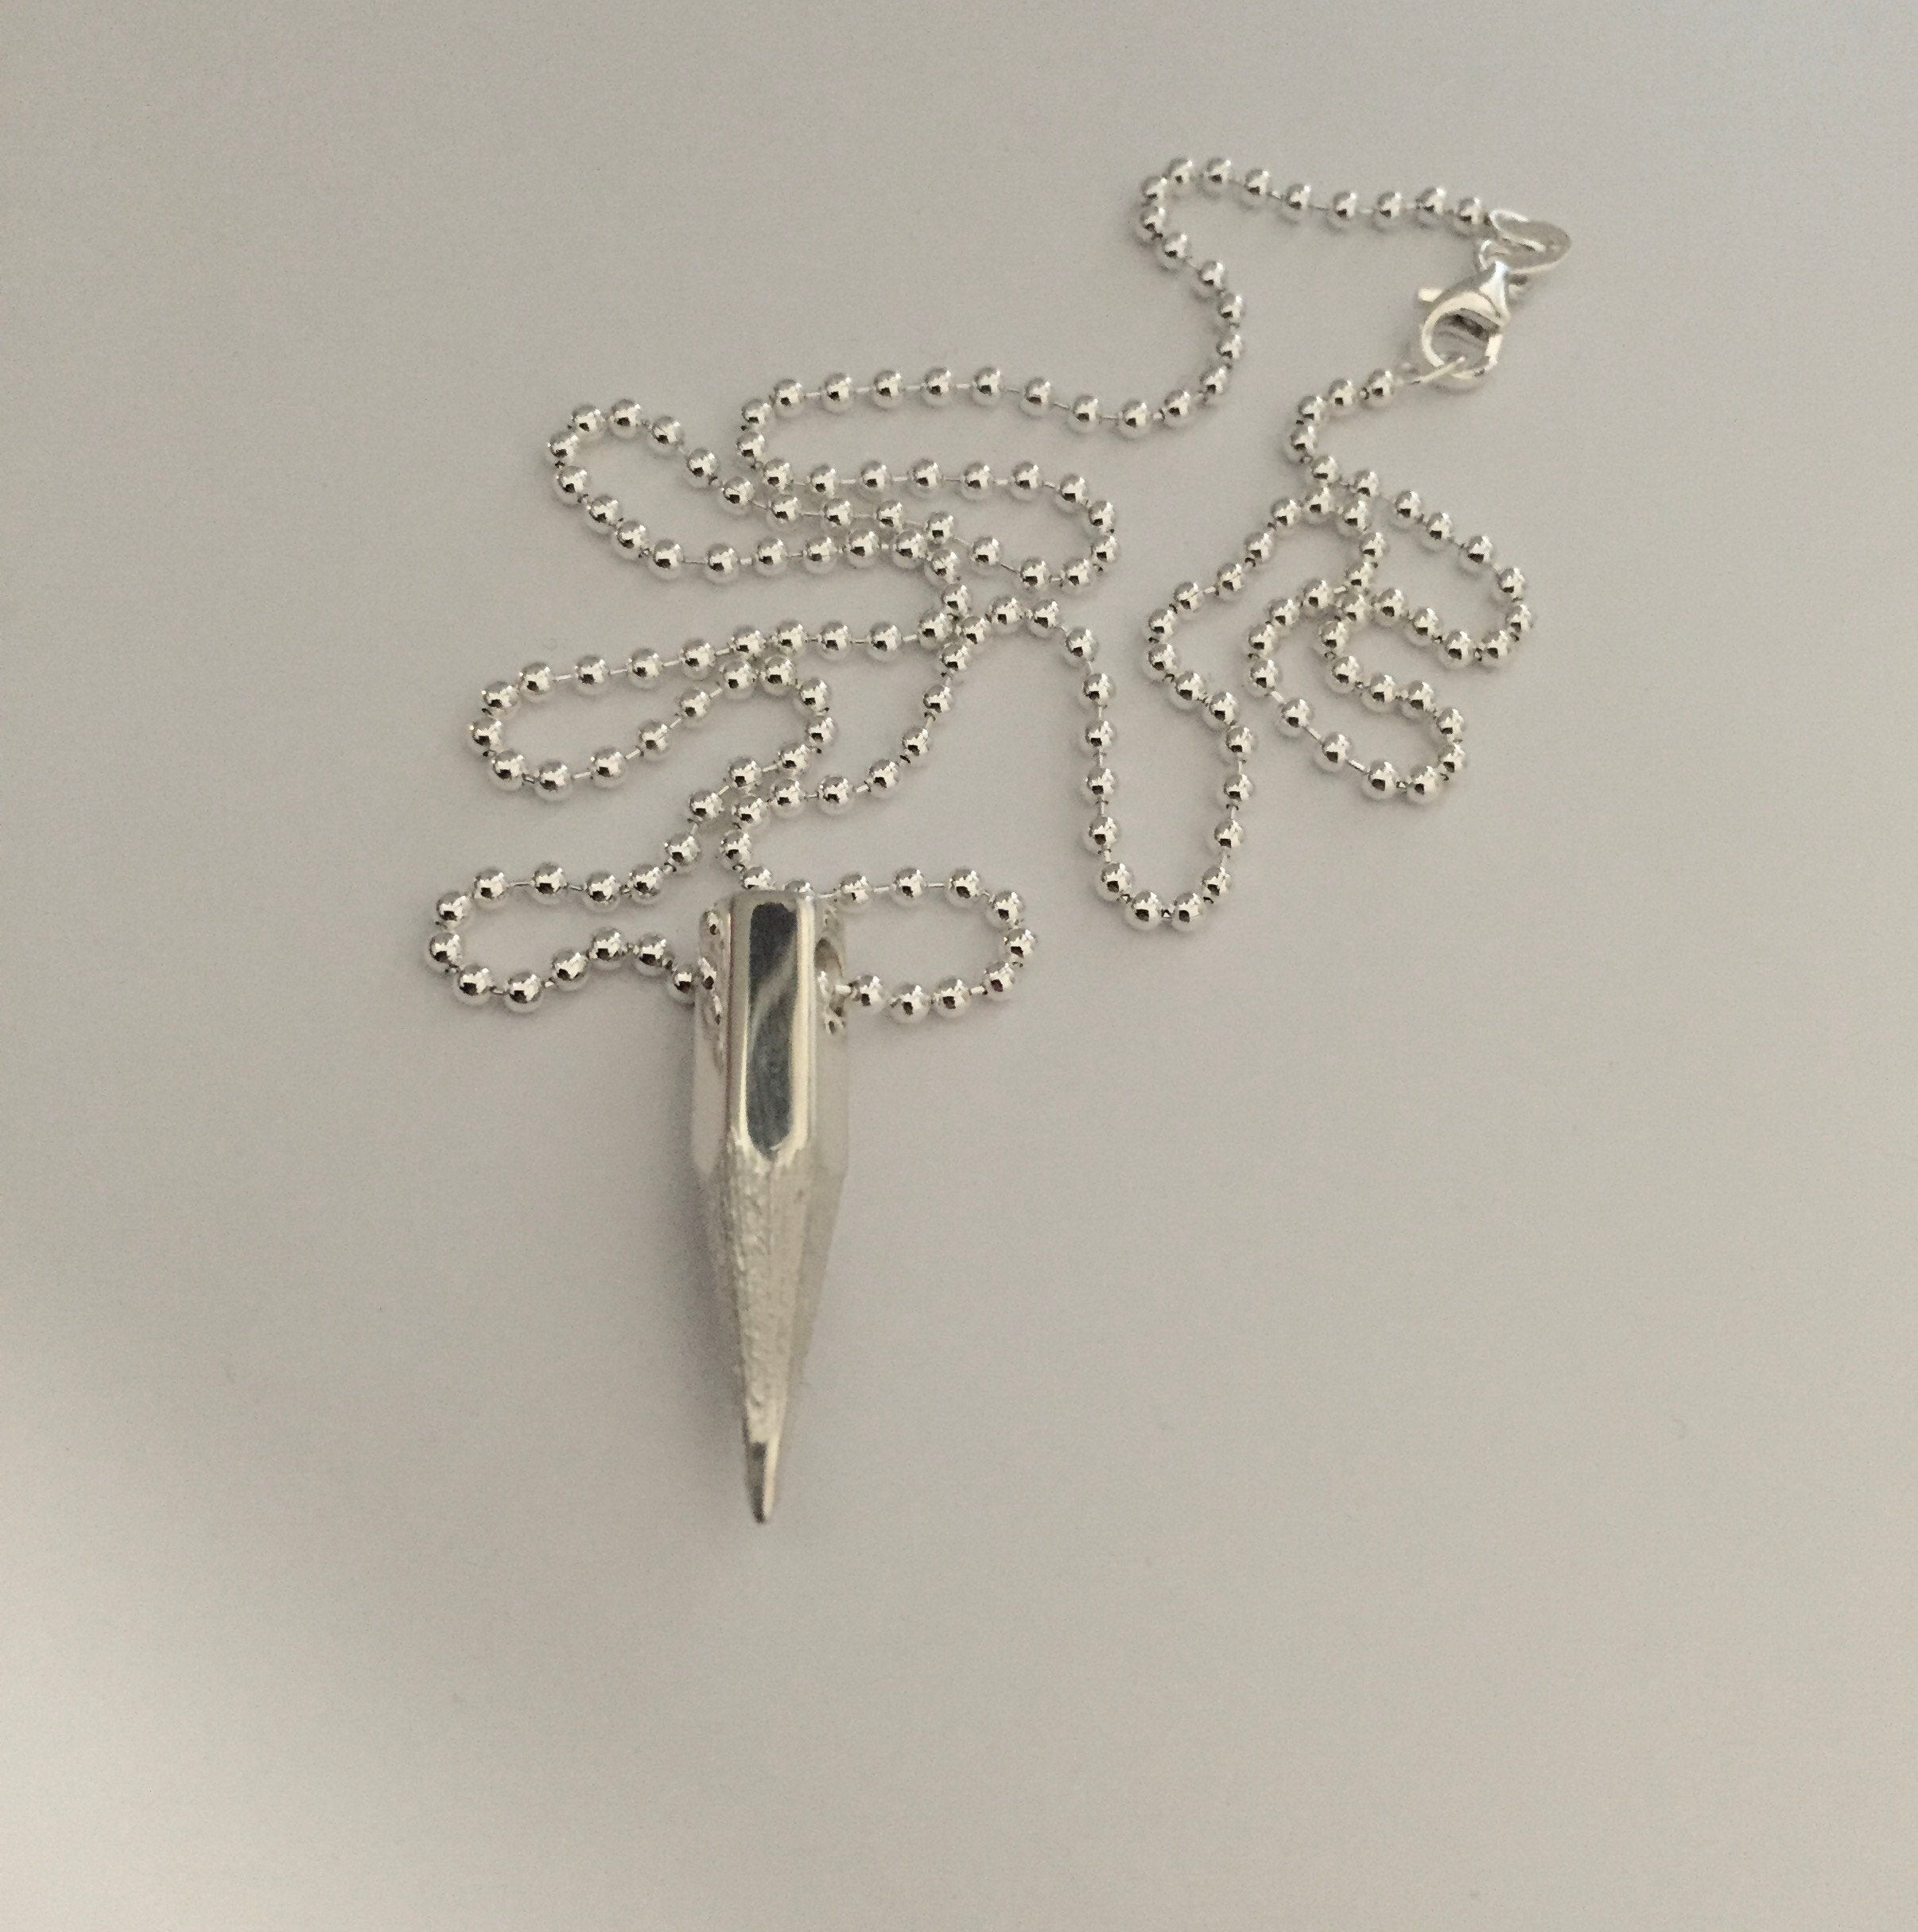 Sharp Words Pendant on a silver chain